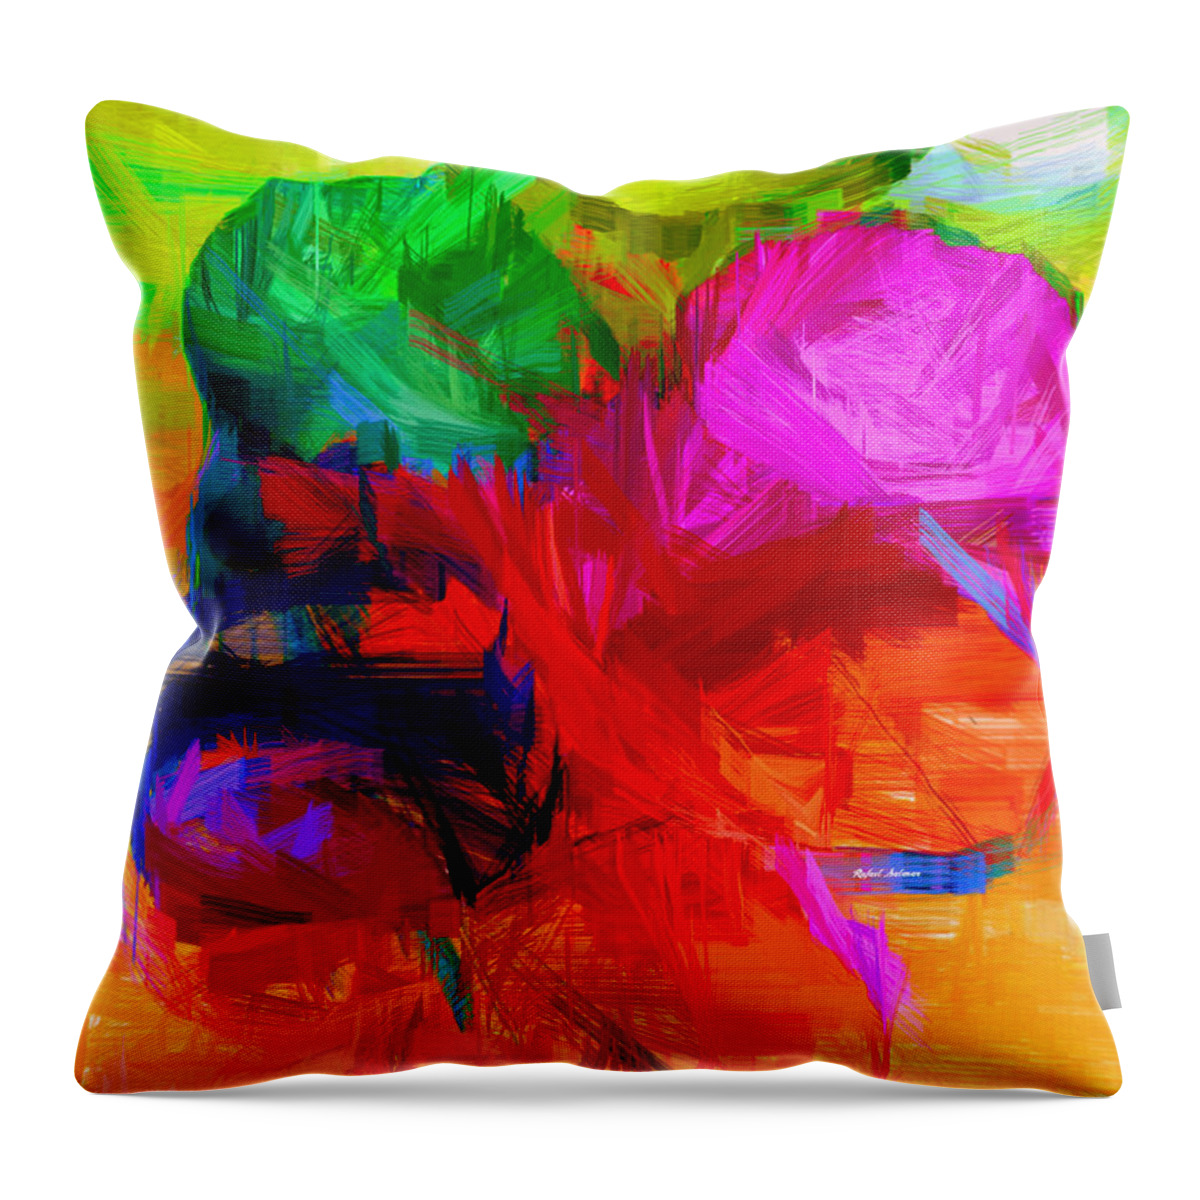  Throw Pillow featuring the digital art Abstract 23 by Rafael Salazar